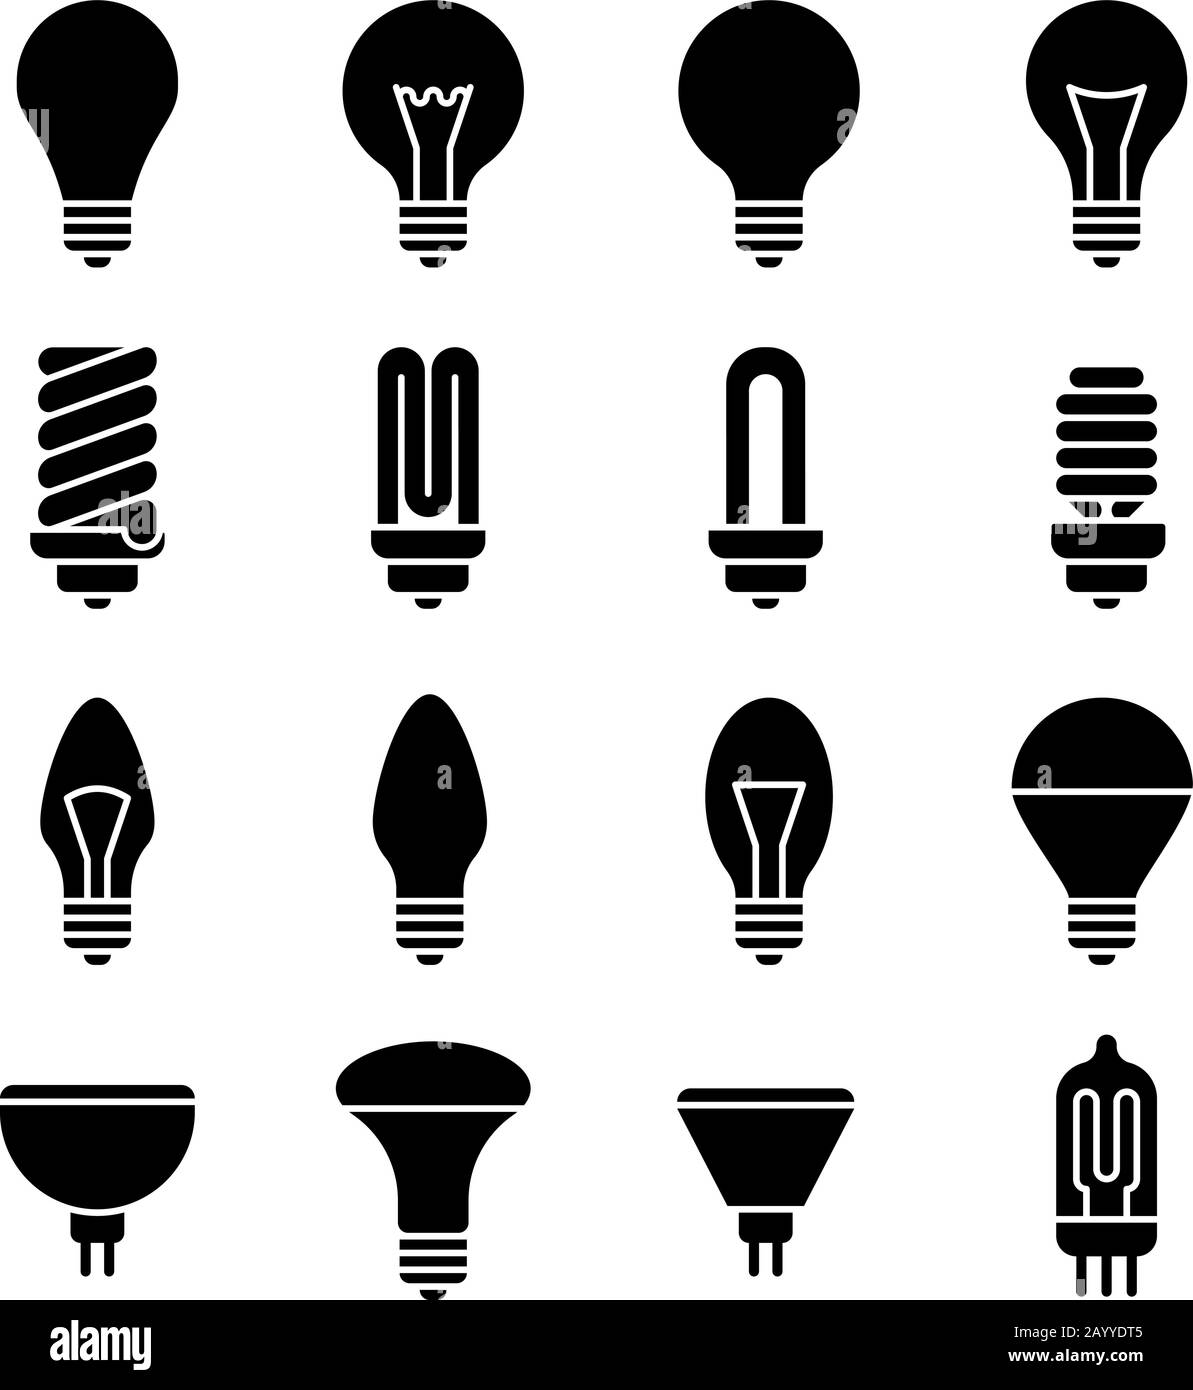 Electricity lamp signs. Light bulb and led lamp vector icons Stock ...